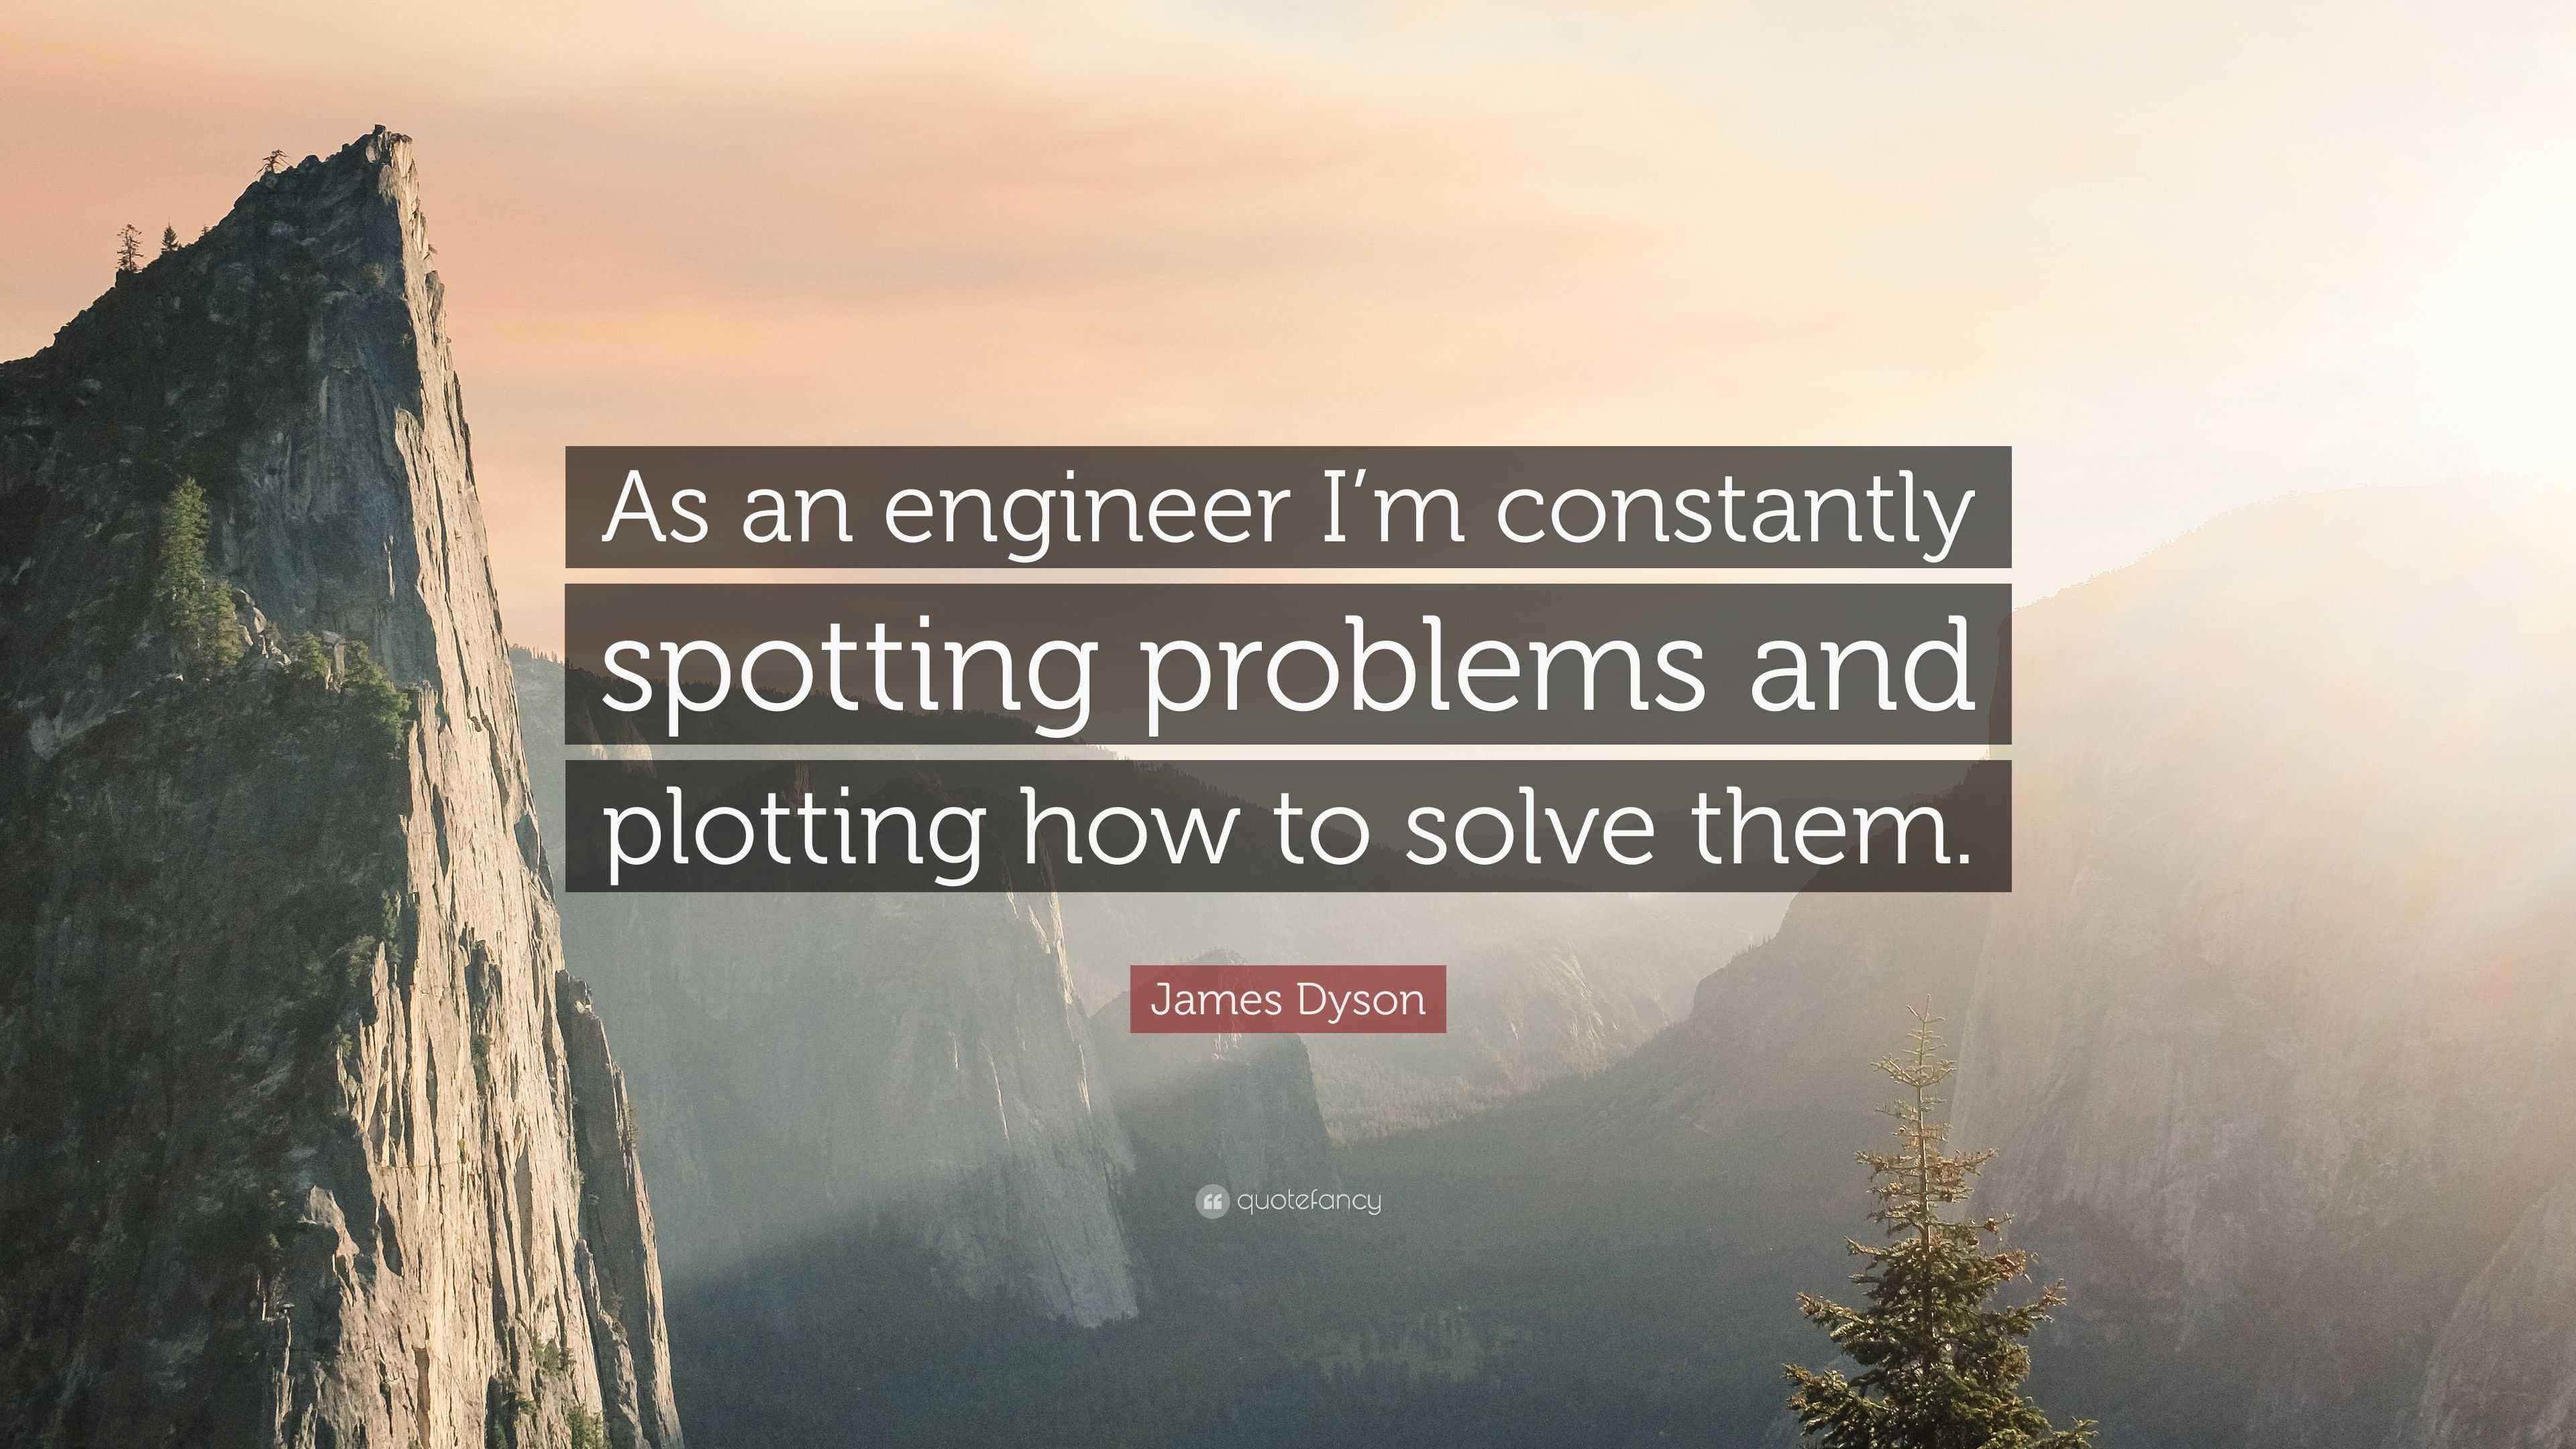 James Dyson Quote: “As an engineer I'm constantly spotting